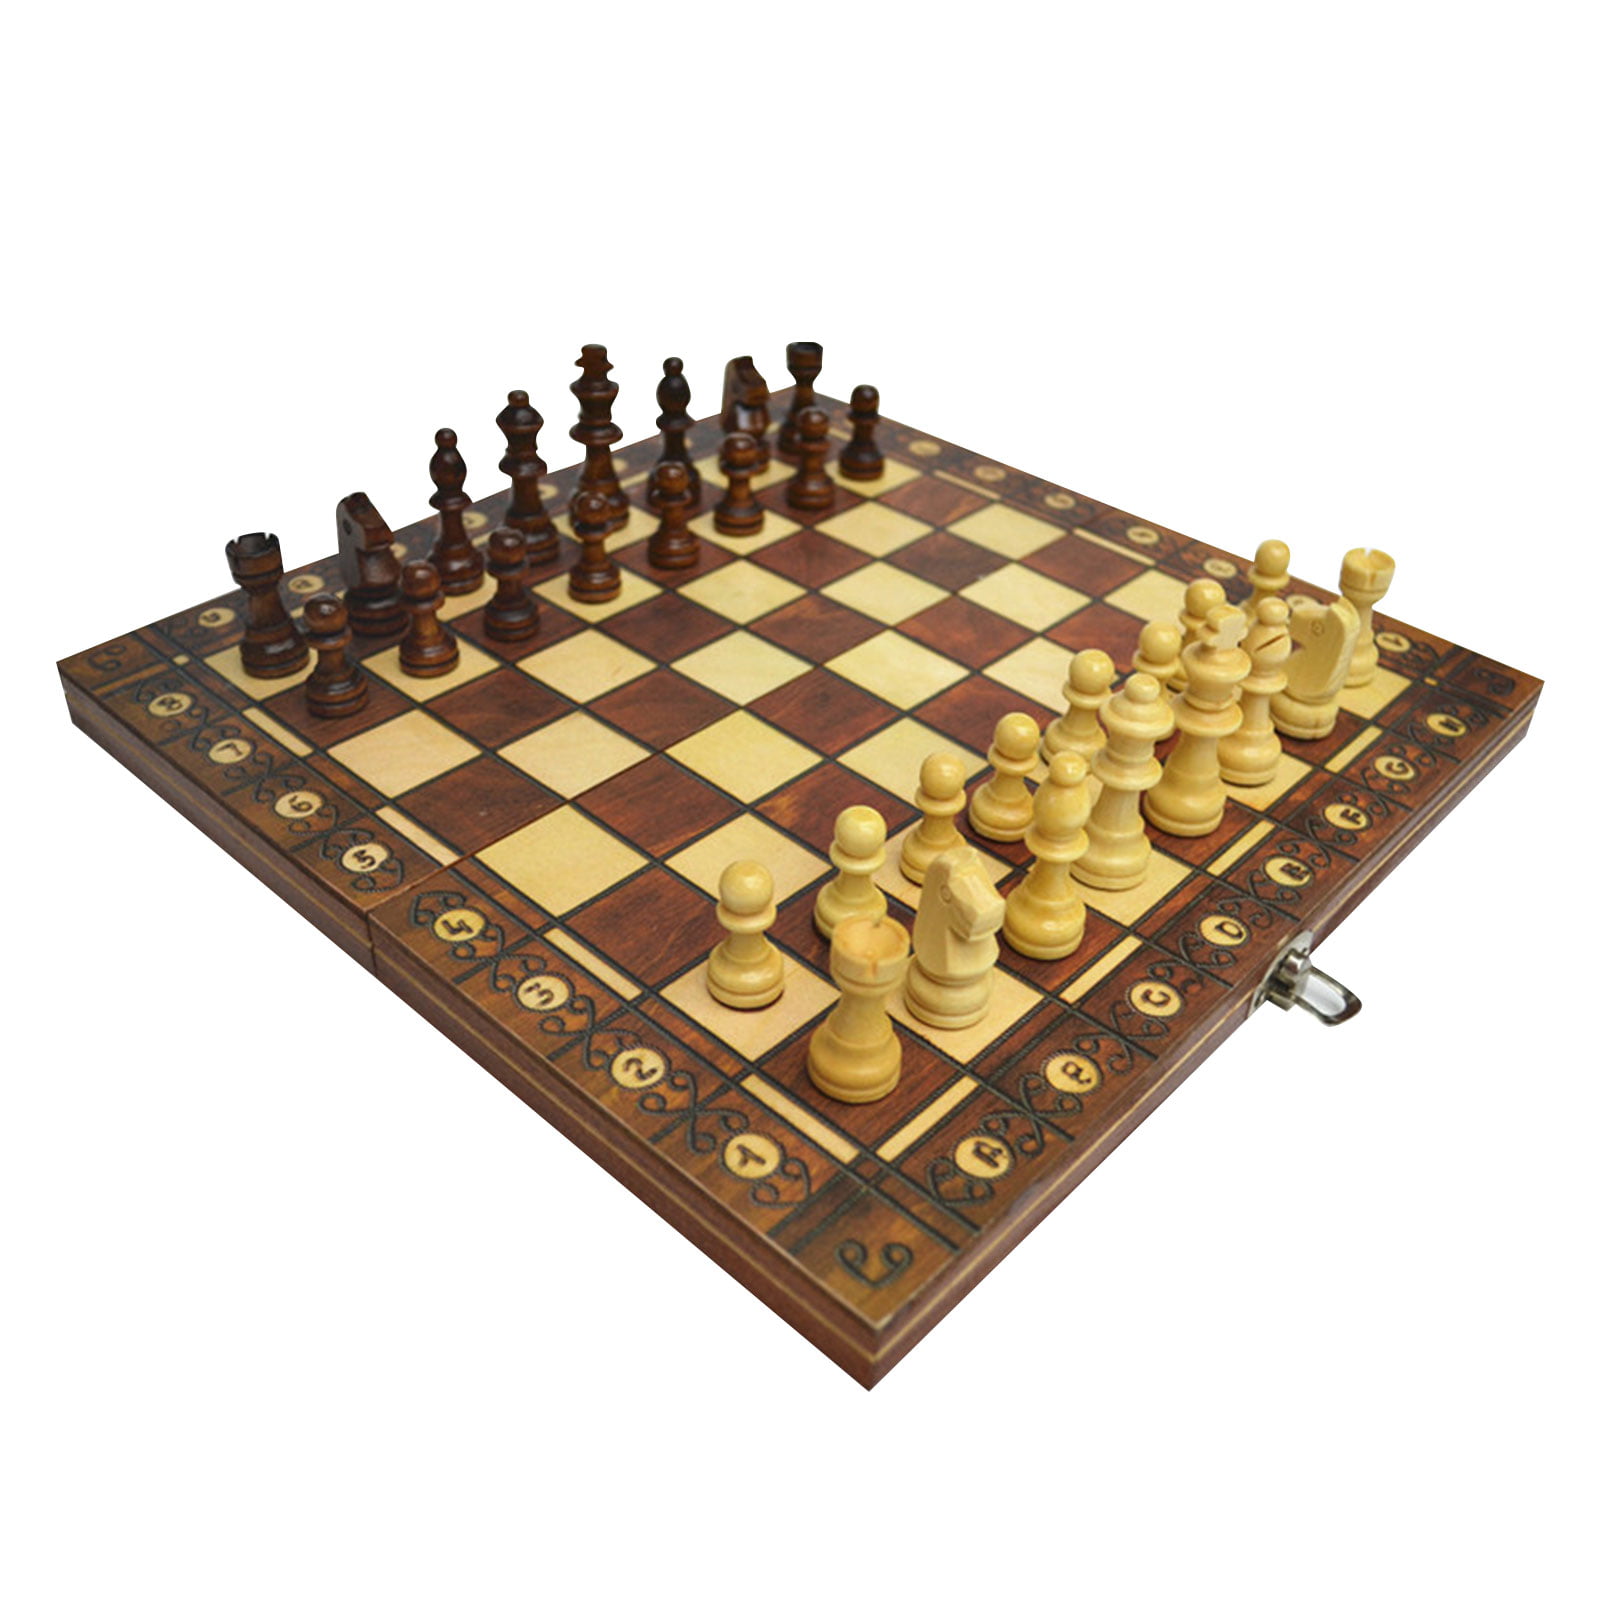 Details about   3 in 1 Wooden Chess Set Board Games Gift for Adults Kids 